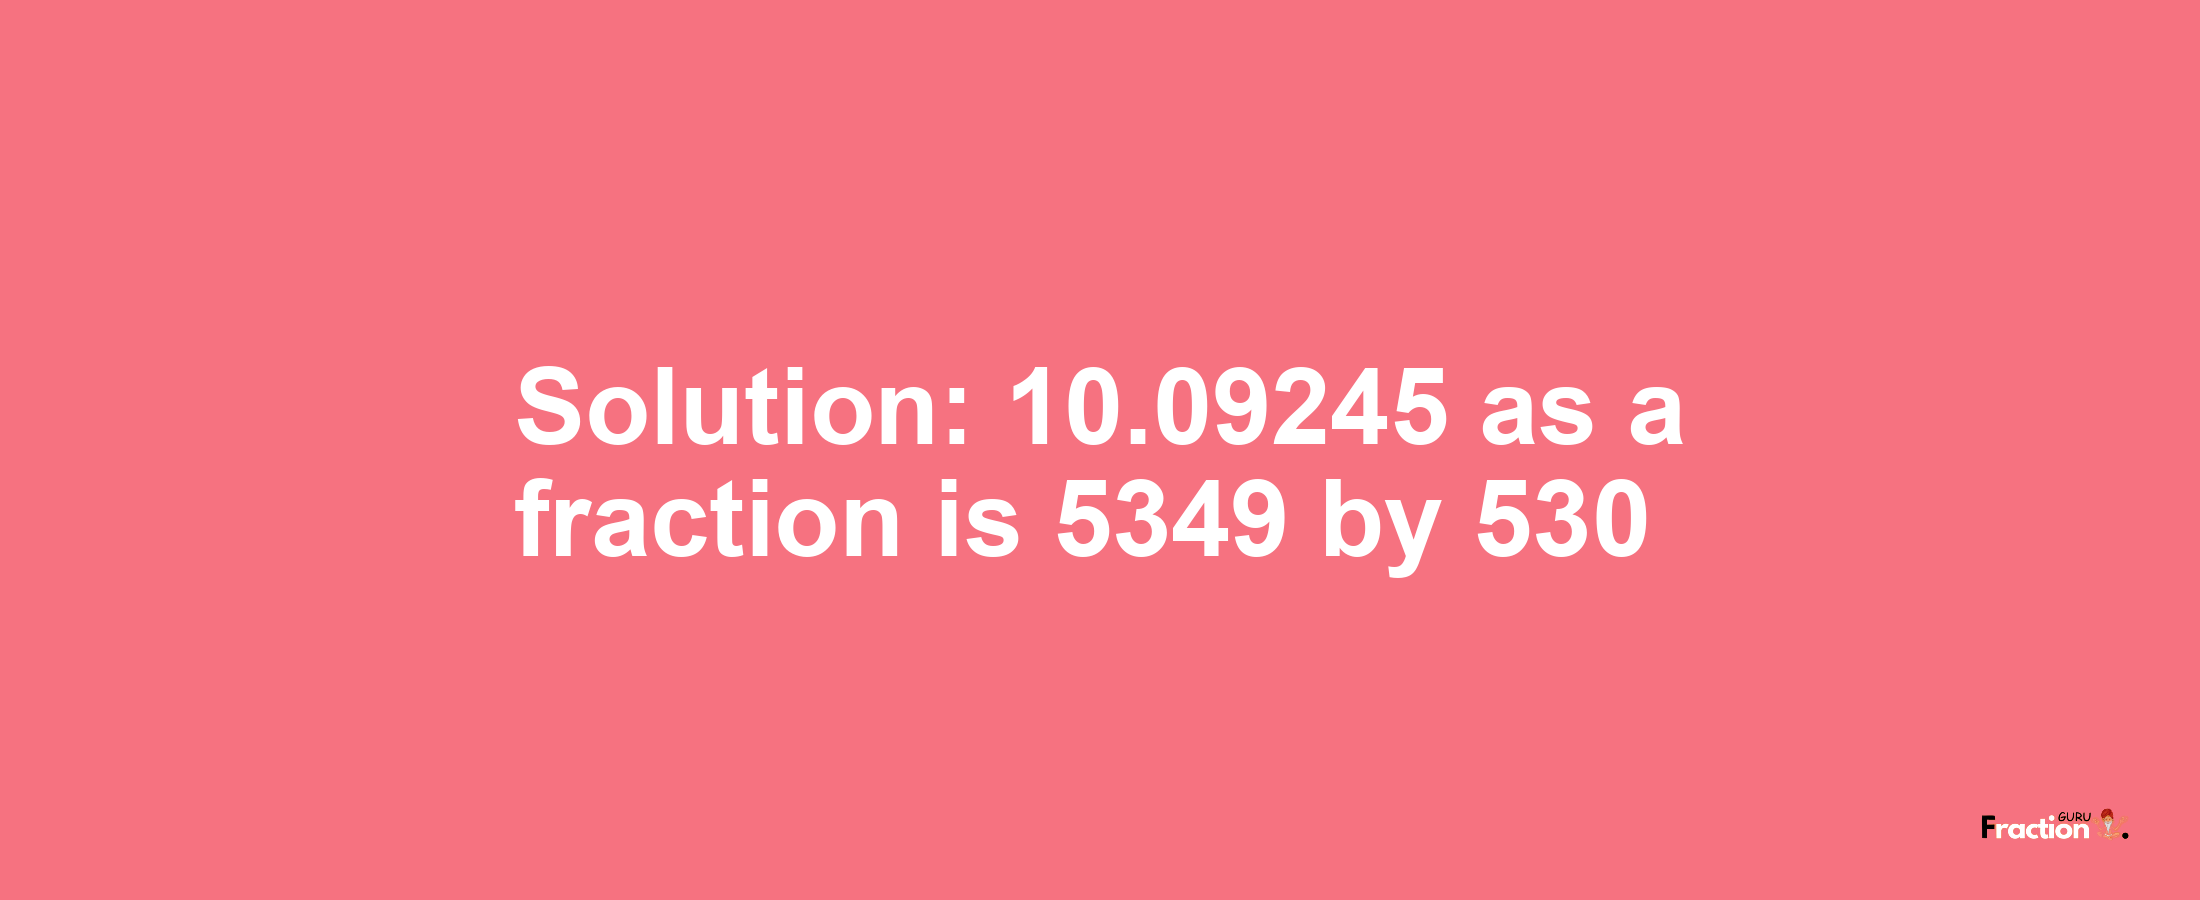 Solution:10.09245 as a fraction is 5349/530